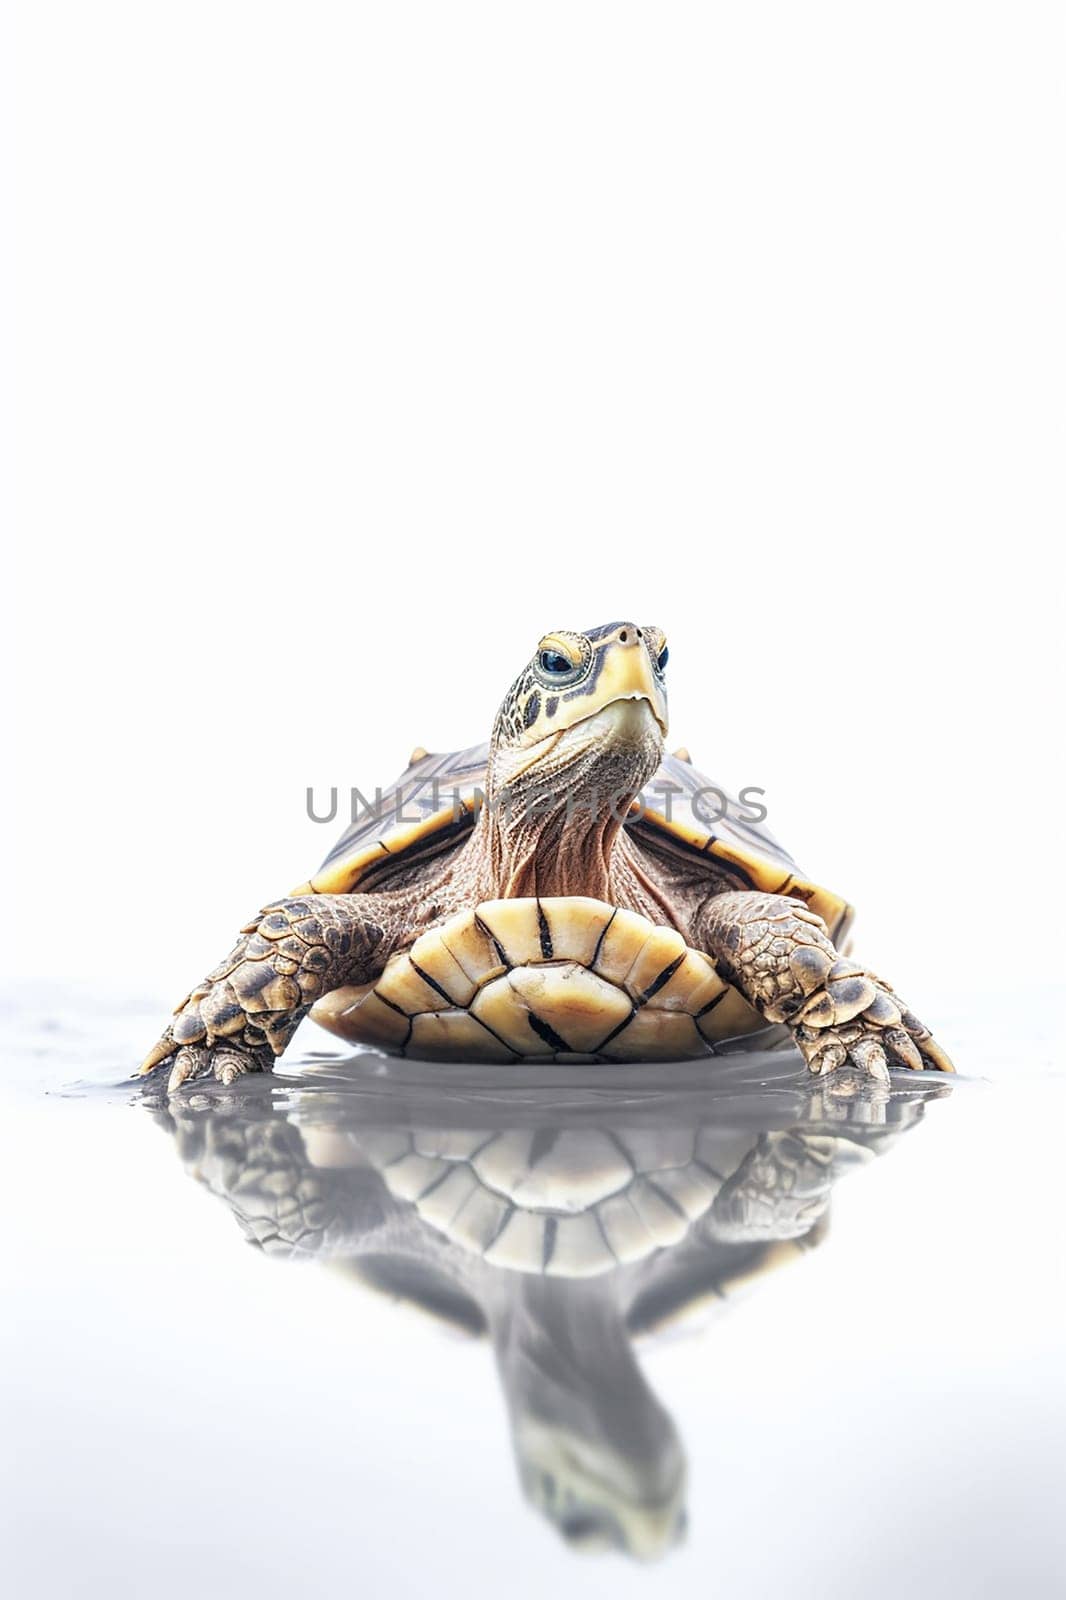 A photo of a turtle, tortoise isolated on white